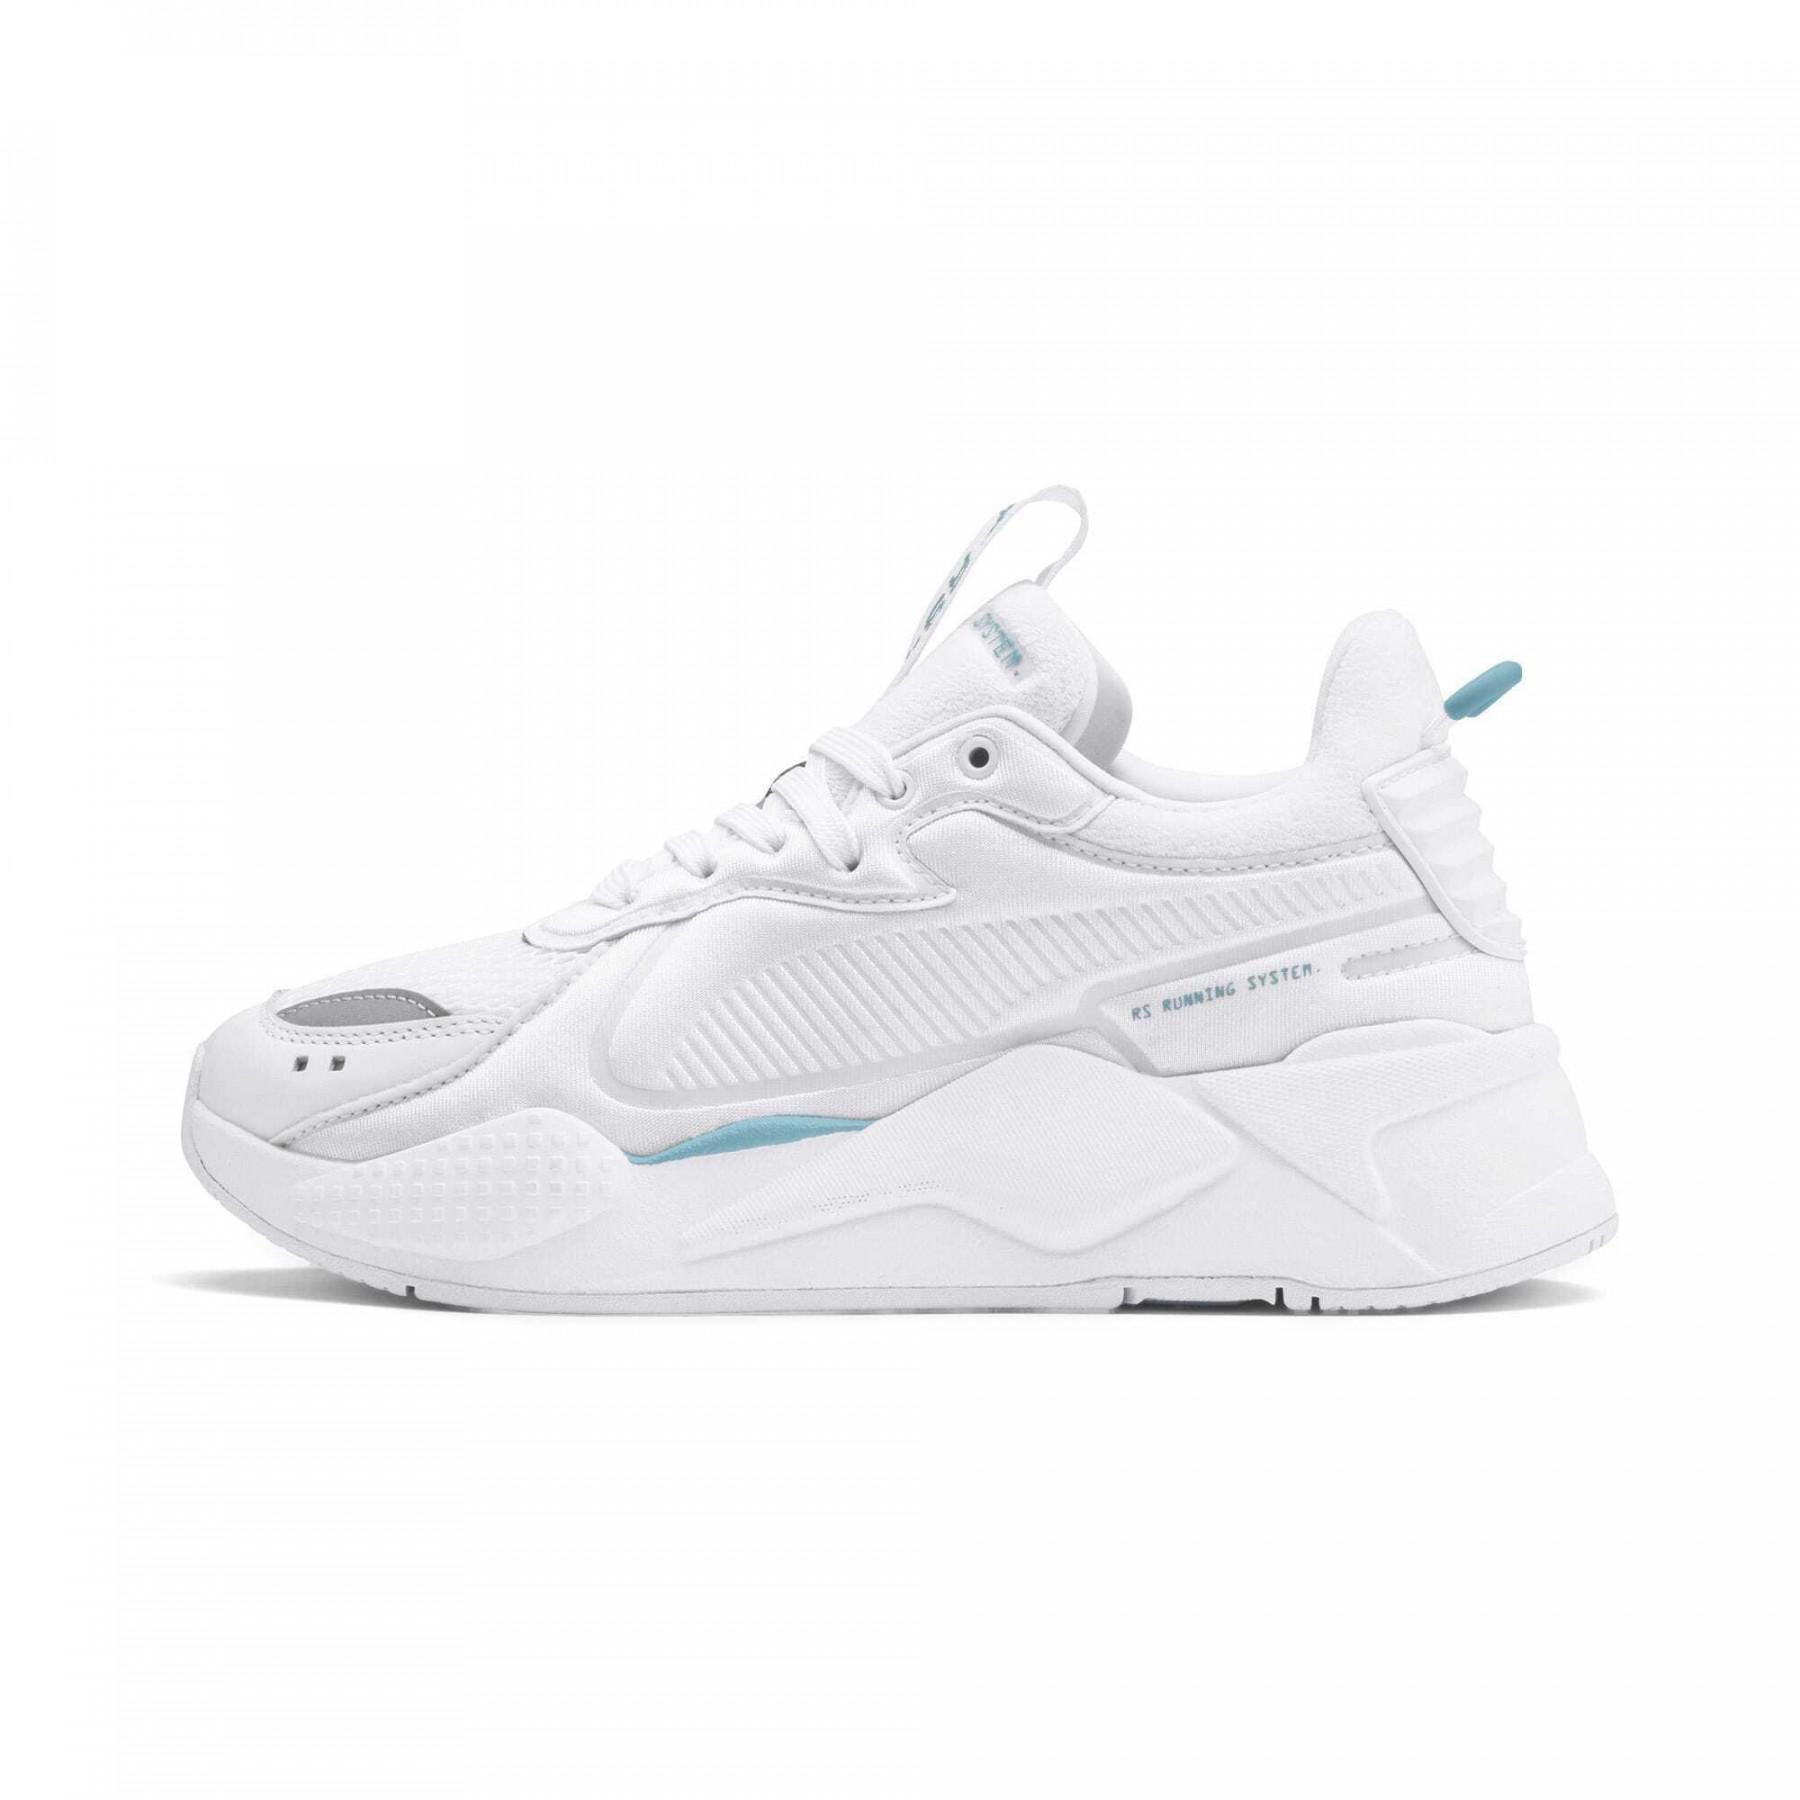 Women's sneakers Puma RS-X Softcase